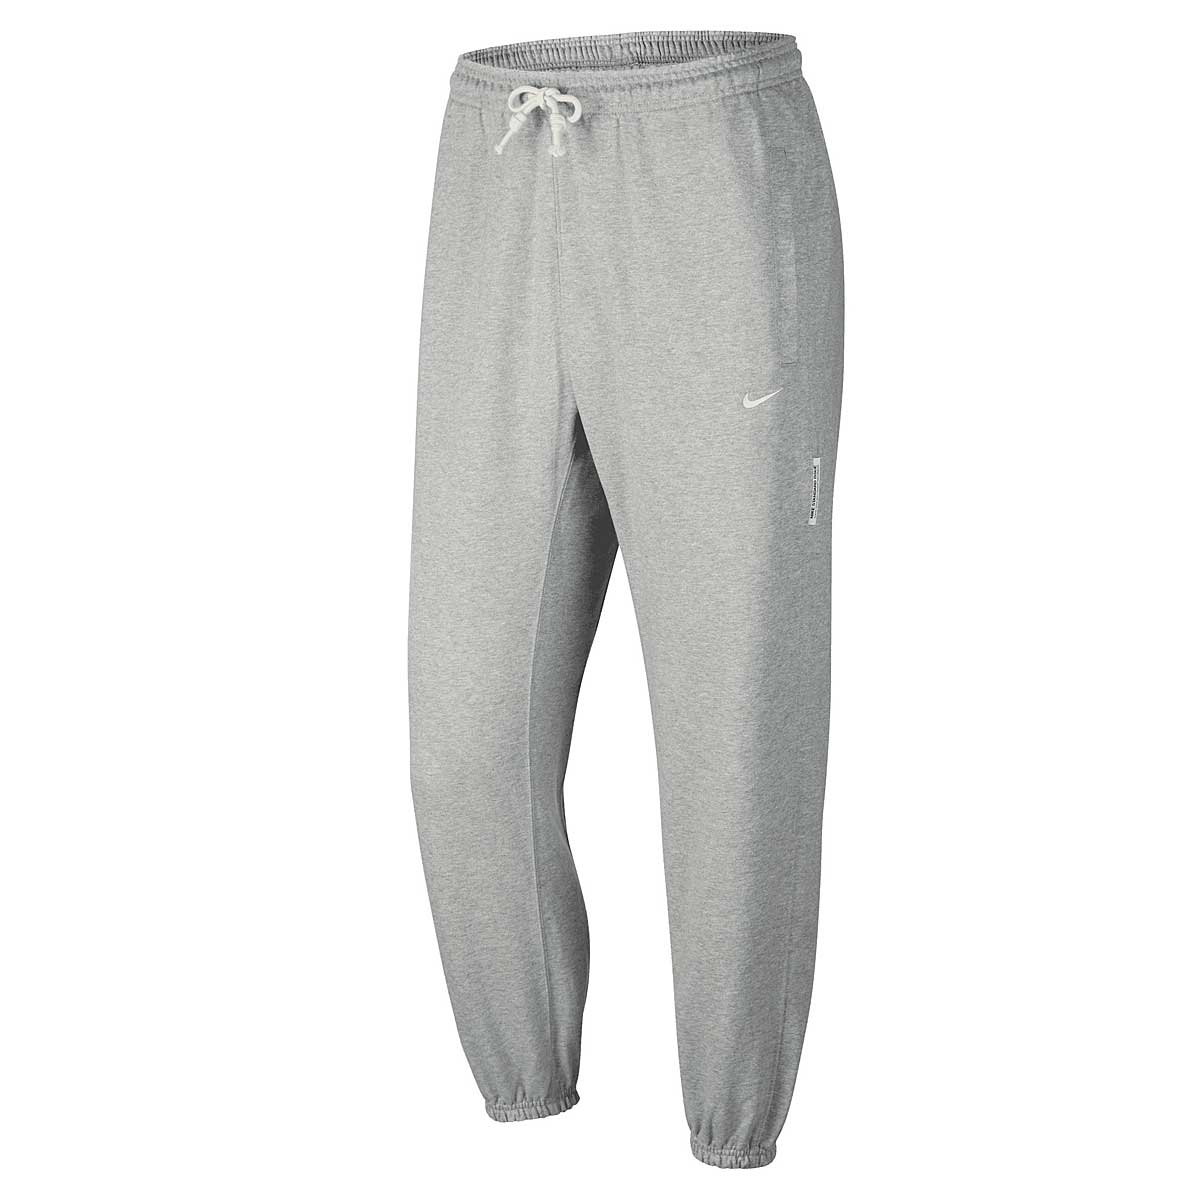 Nike Dri-Fit Standard Issue Pant, Dk Grey Heather/Pale Ivory